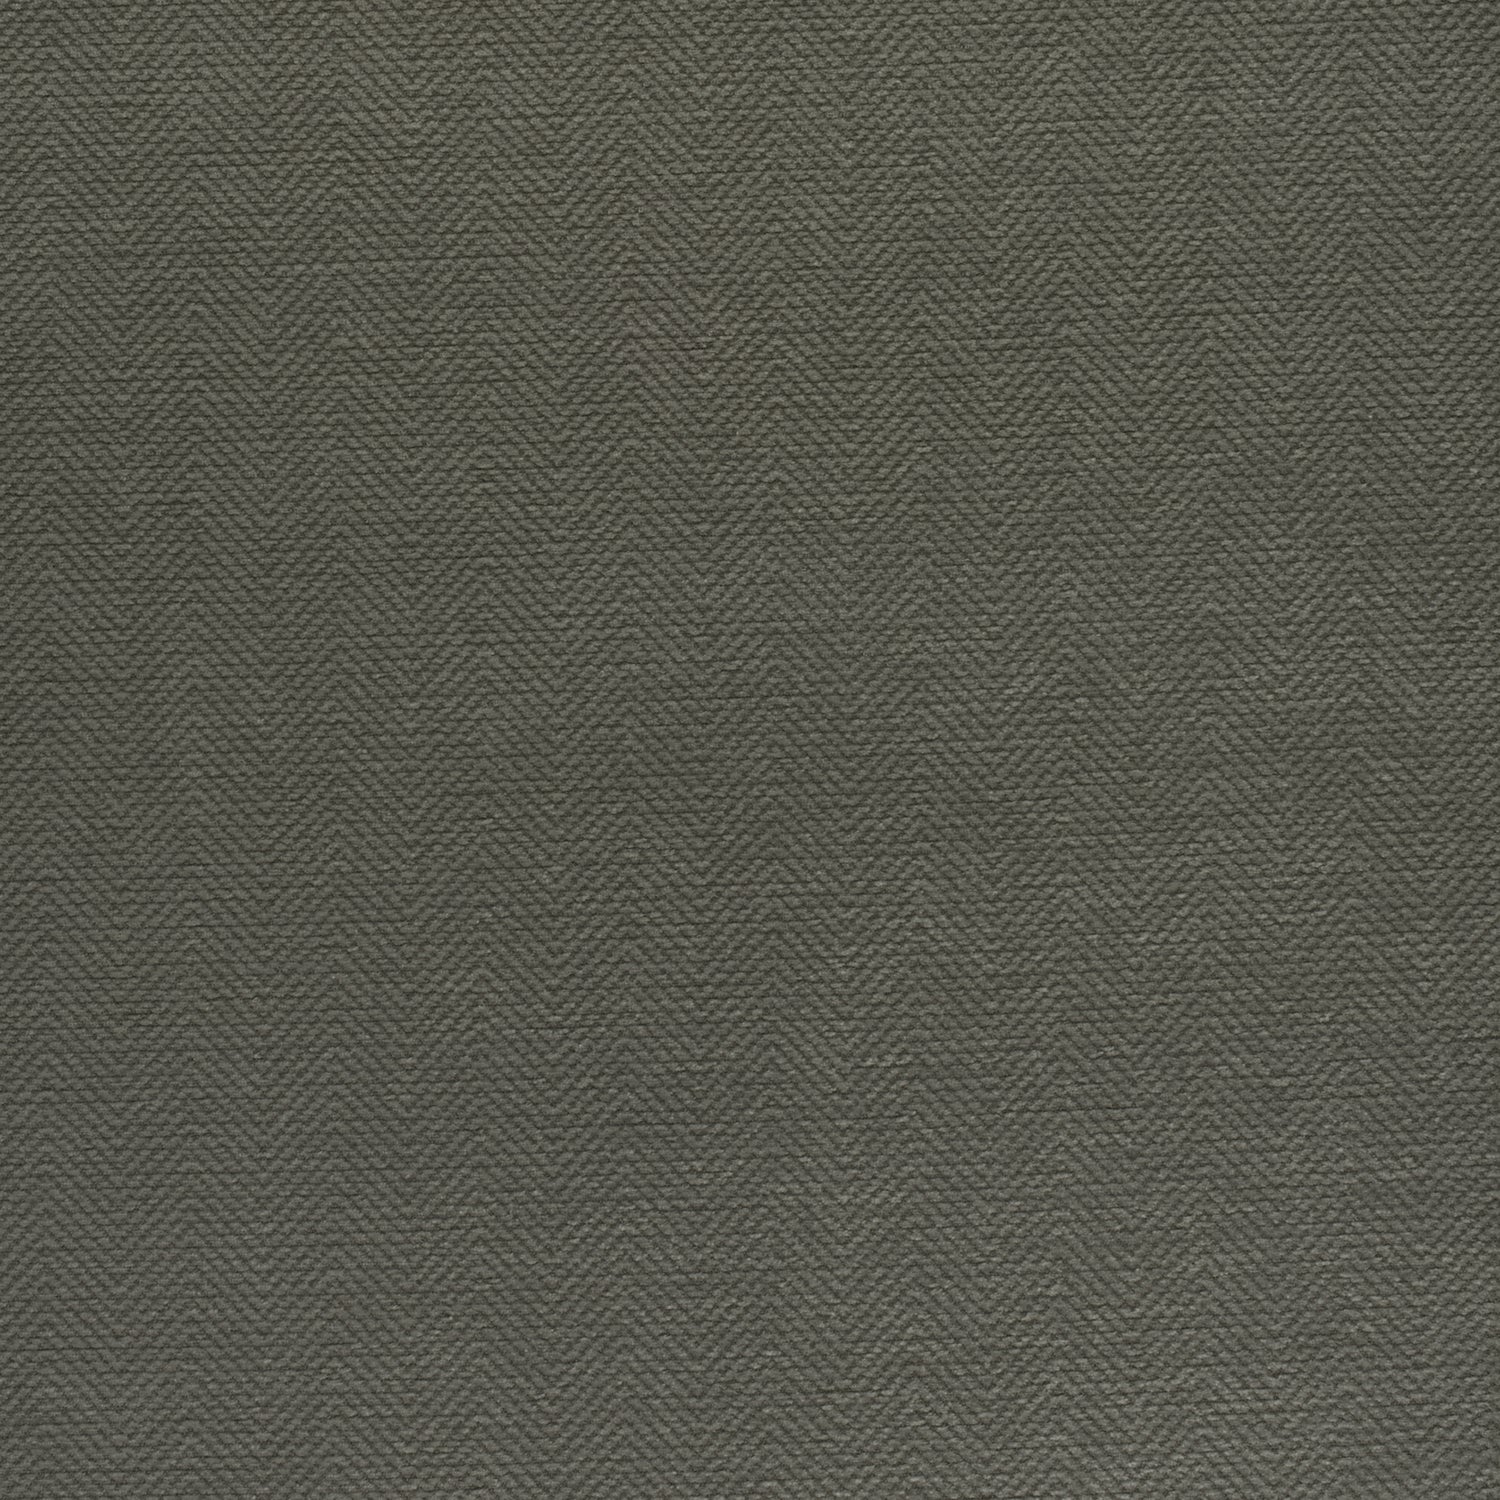 Bronwyn Herringbone fabric in charcoal color - pattern number W80685 - by Thibaut in the Pinnacle collection